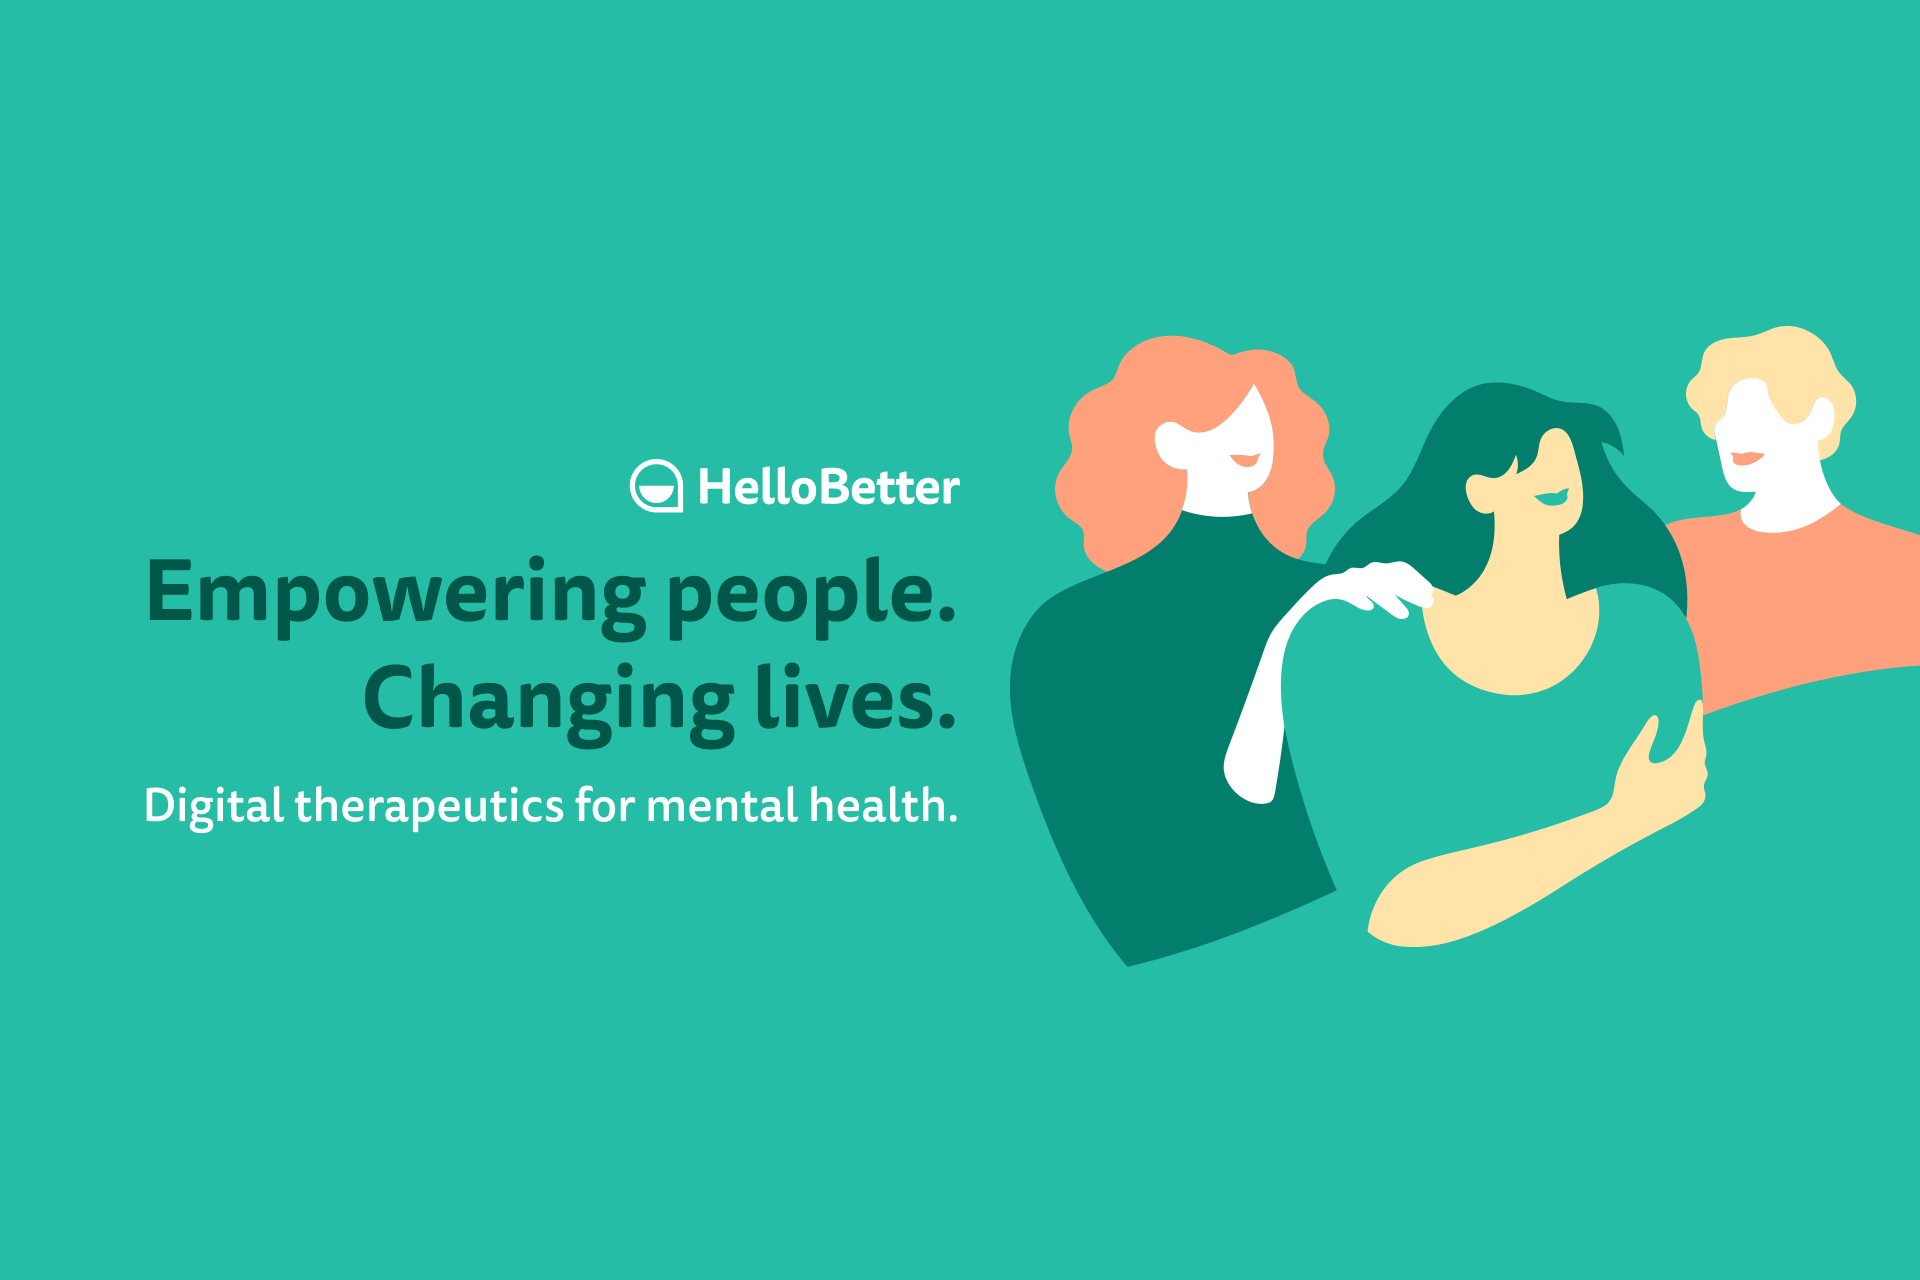 Title image: Welcome HelloBetter Insights